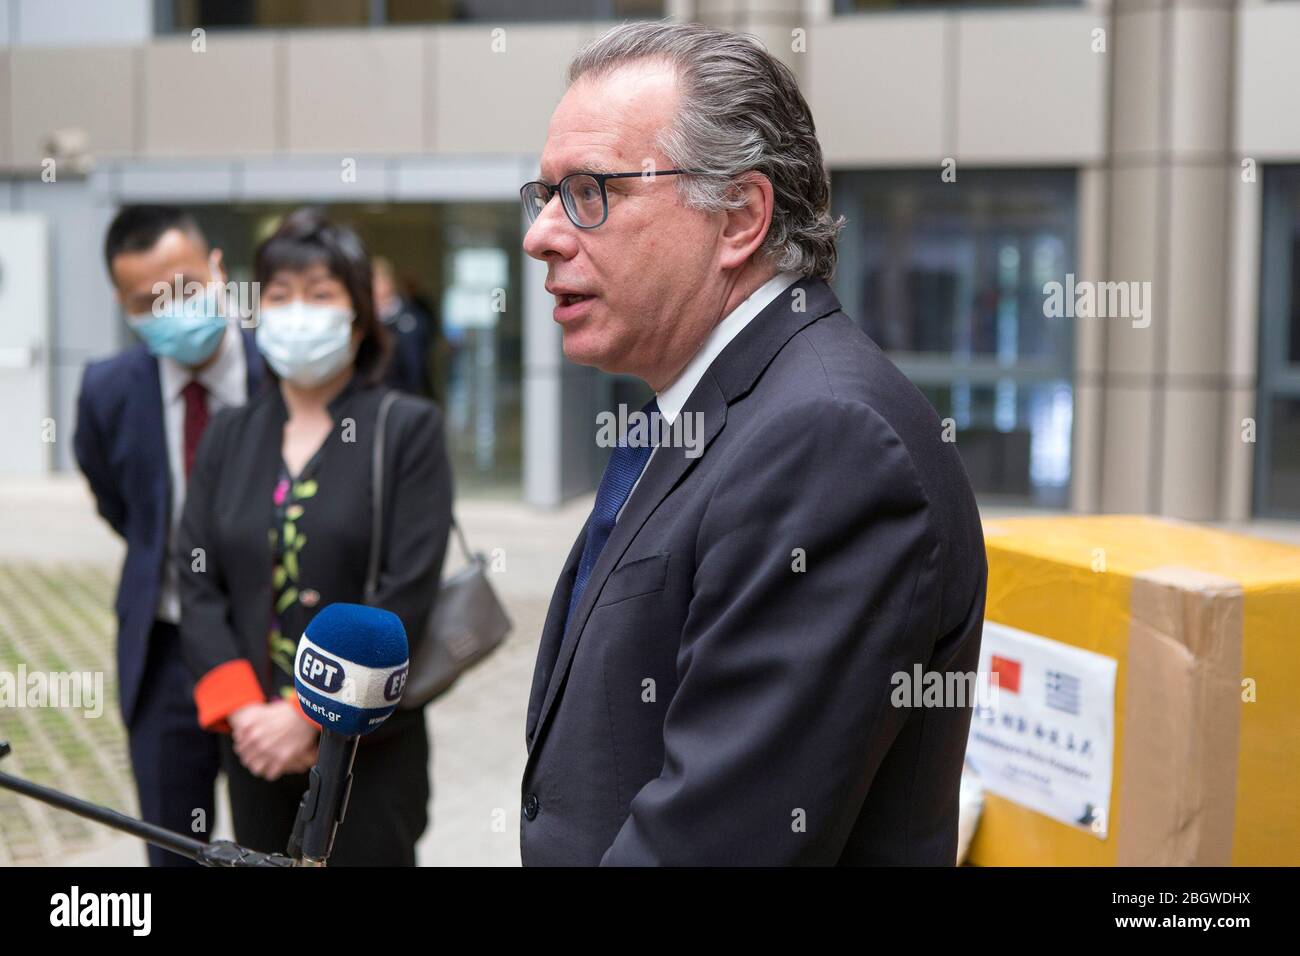 Athens, Greece. 22nd Apr, 2020. Greek Alternate Migration and Asylum Minister Giorgos Koumoutsakos speaks at the donation handover ceremony in Athens, Greece, on April 22, 2020. Greece welcomed on Wednesday the donation by China to help curb the spread of the novel coronavirus at hosting facilities, where thousands of refugees and migrants are accommodated. Credit: Marios Lolos/Xinhua/Alamy Live News Stock Photo